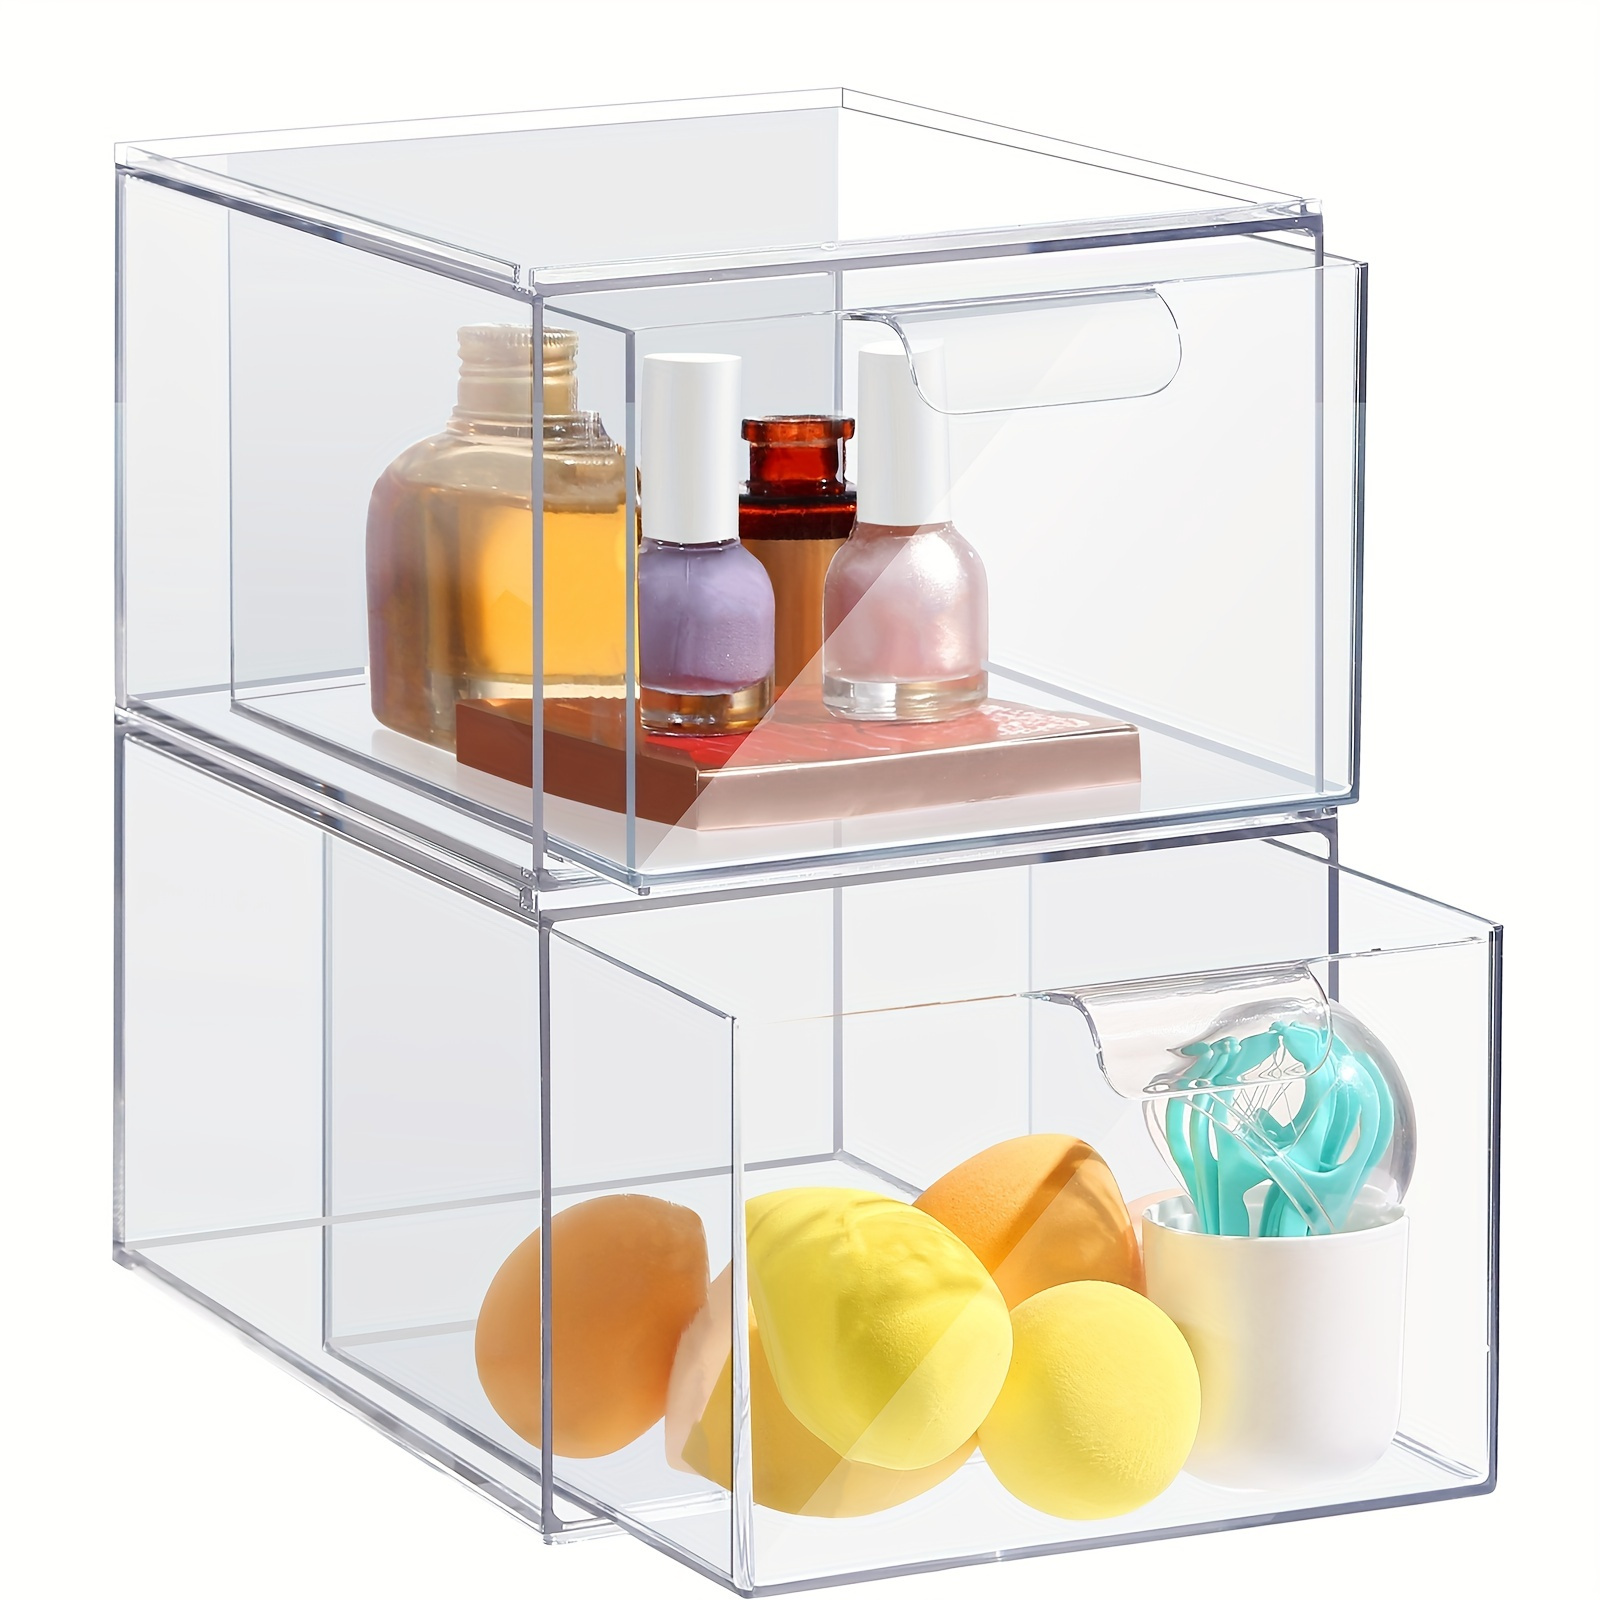 

2pcs Stackable Clear Drawer Organizer For Bathroom And Under Sink Storage - Acrylic Multi-purpose Bins For Cosmetics, Makeup, And Nail Art